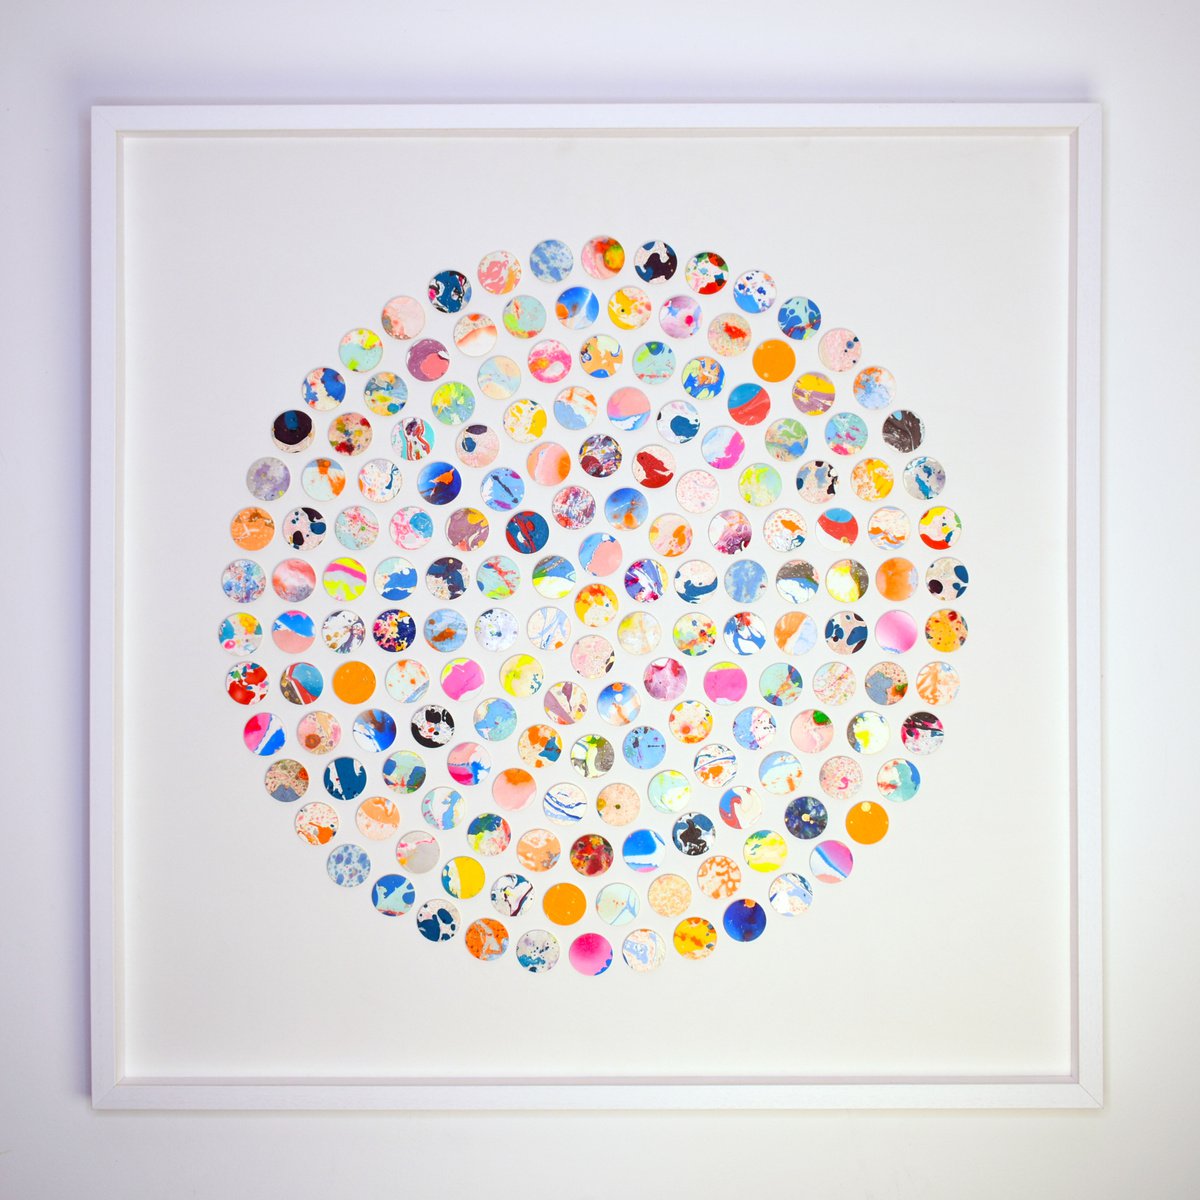 large scale original marble spot 3d collaged painting white by Amelia Coward